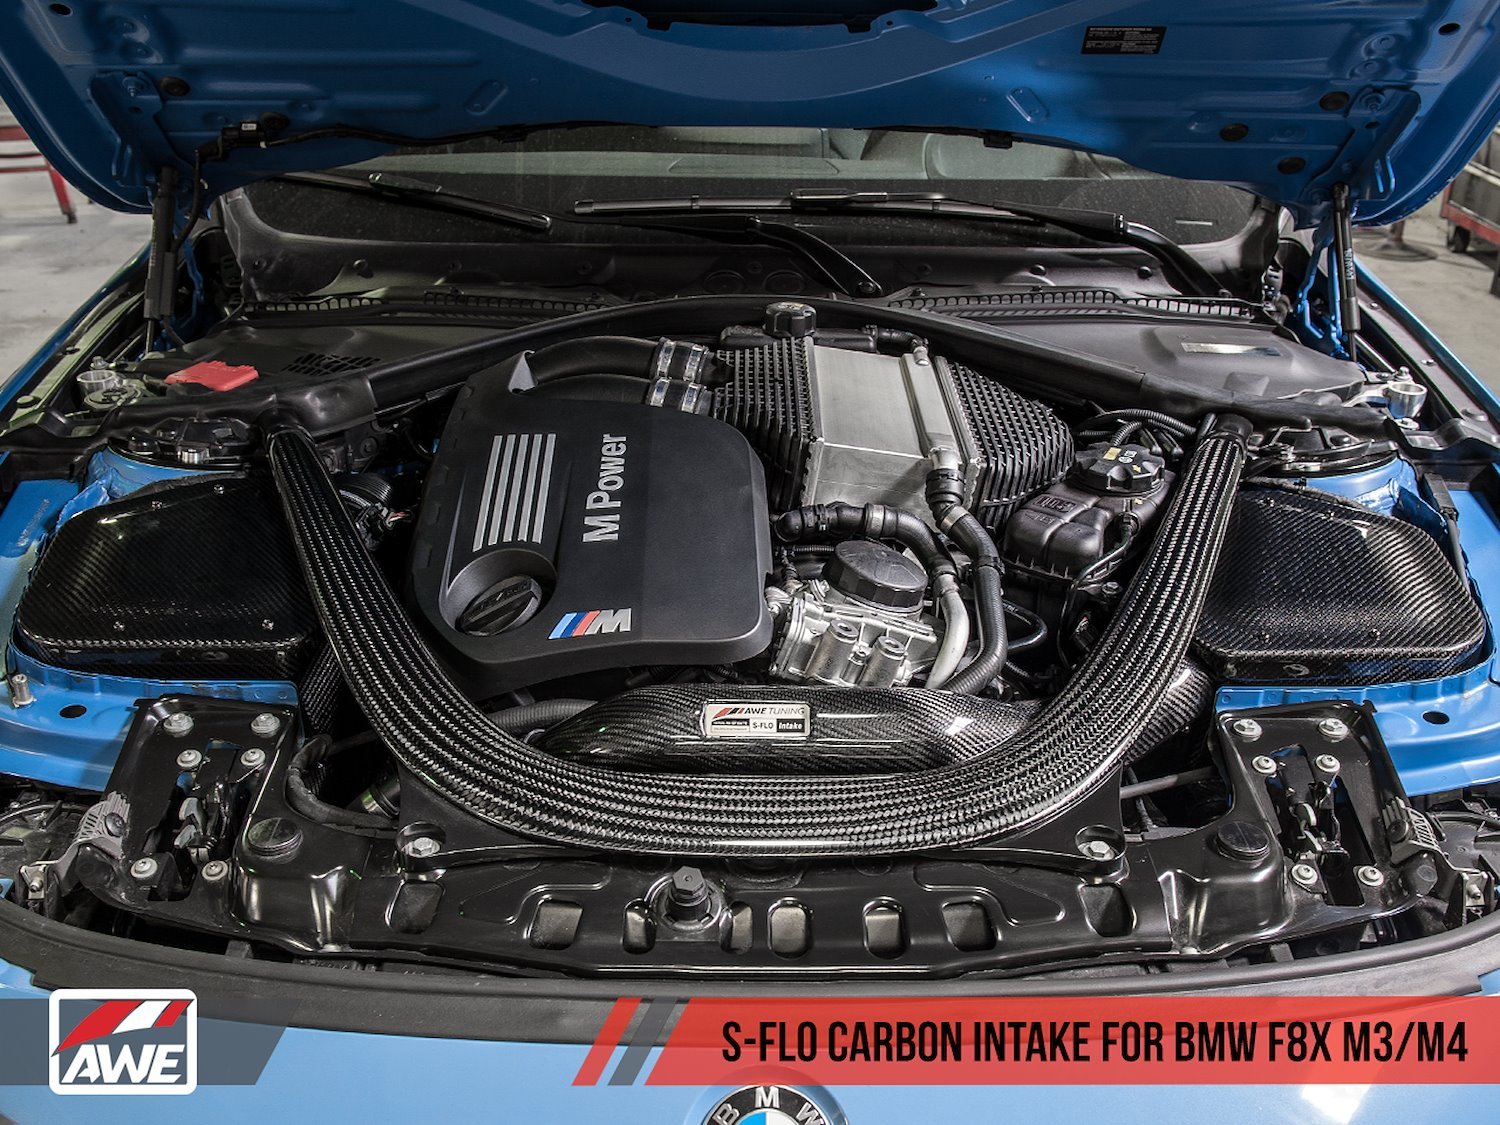 S-FLO Carbon Intake for BMW F8X M3 / M4